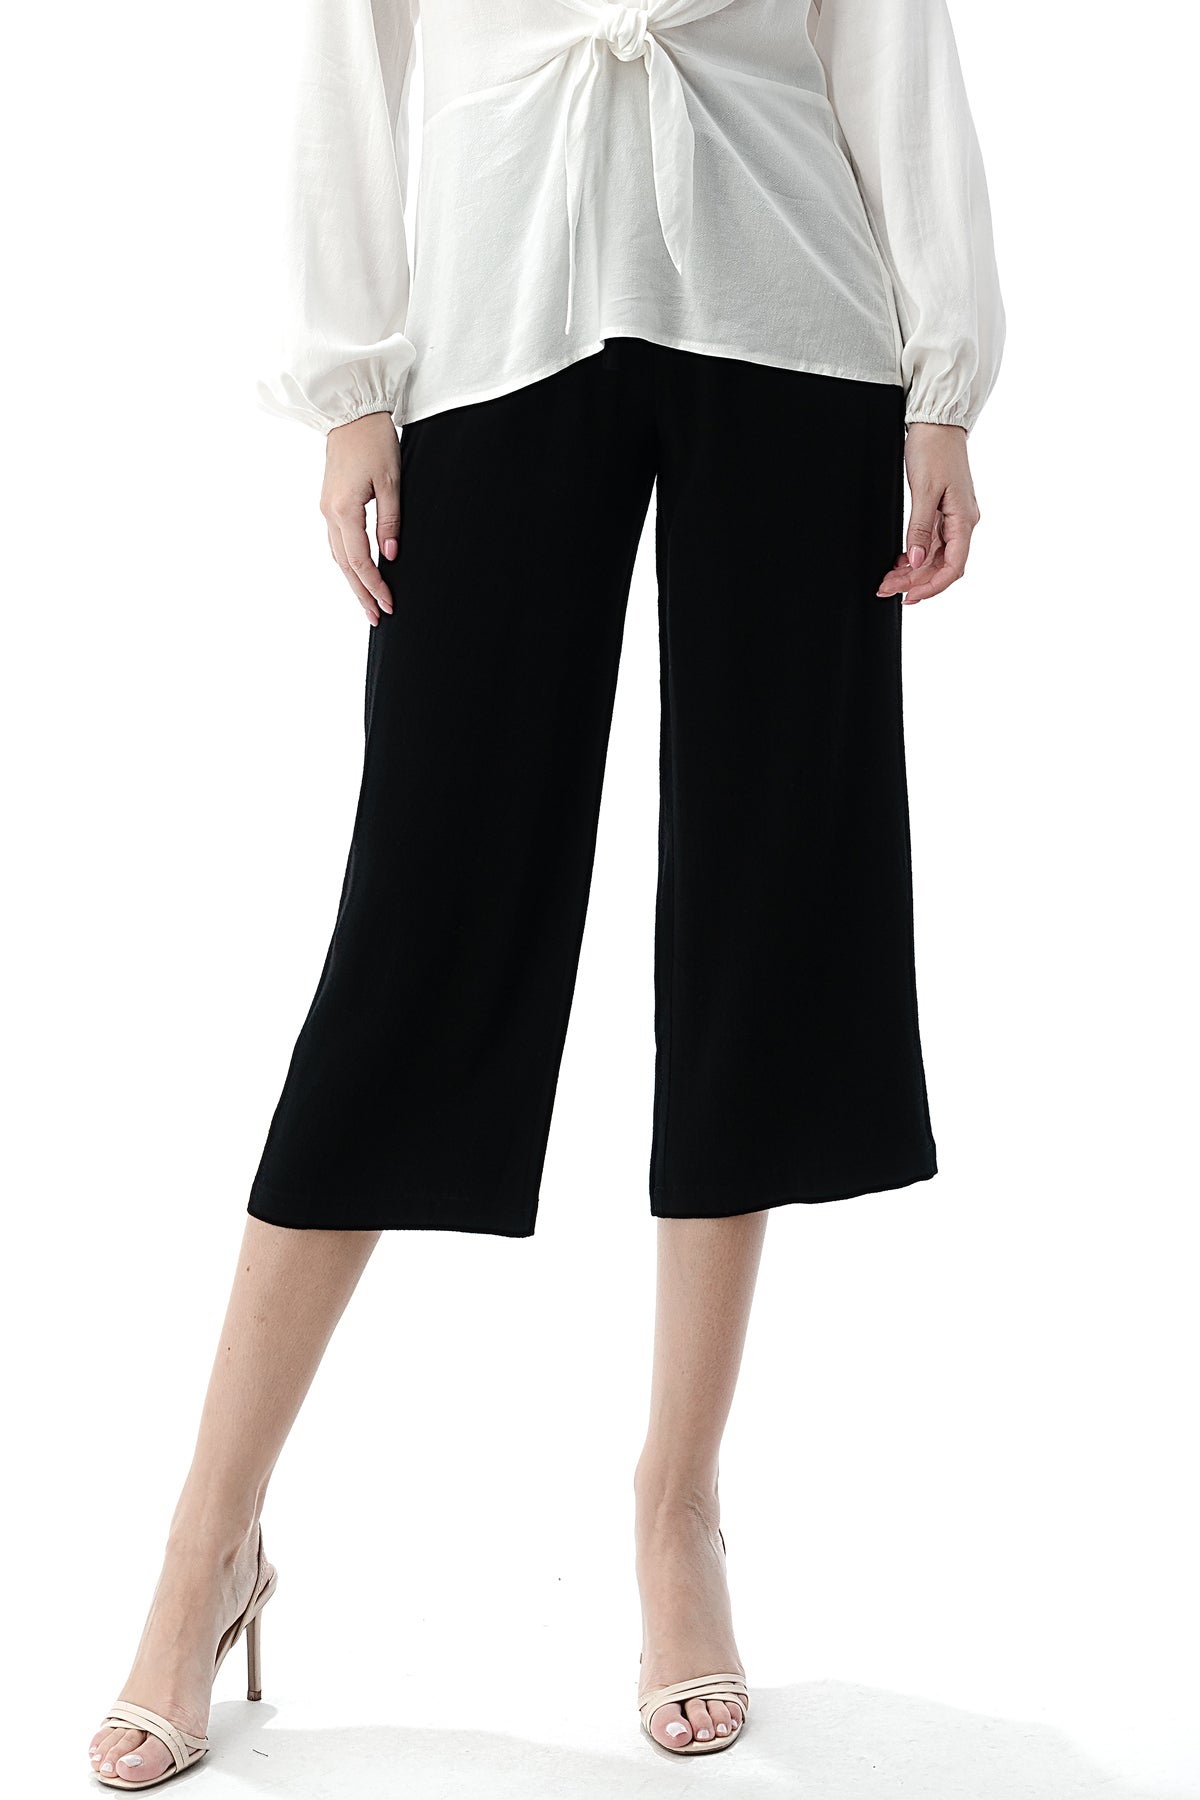 EDGY Land Girl's and Women's Drawstring Tie Shirred Ruffle Waist CroPPEd Fashion Pant